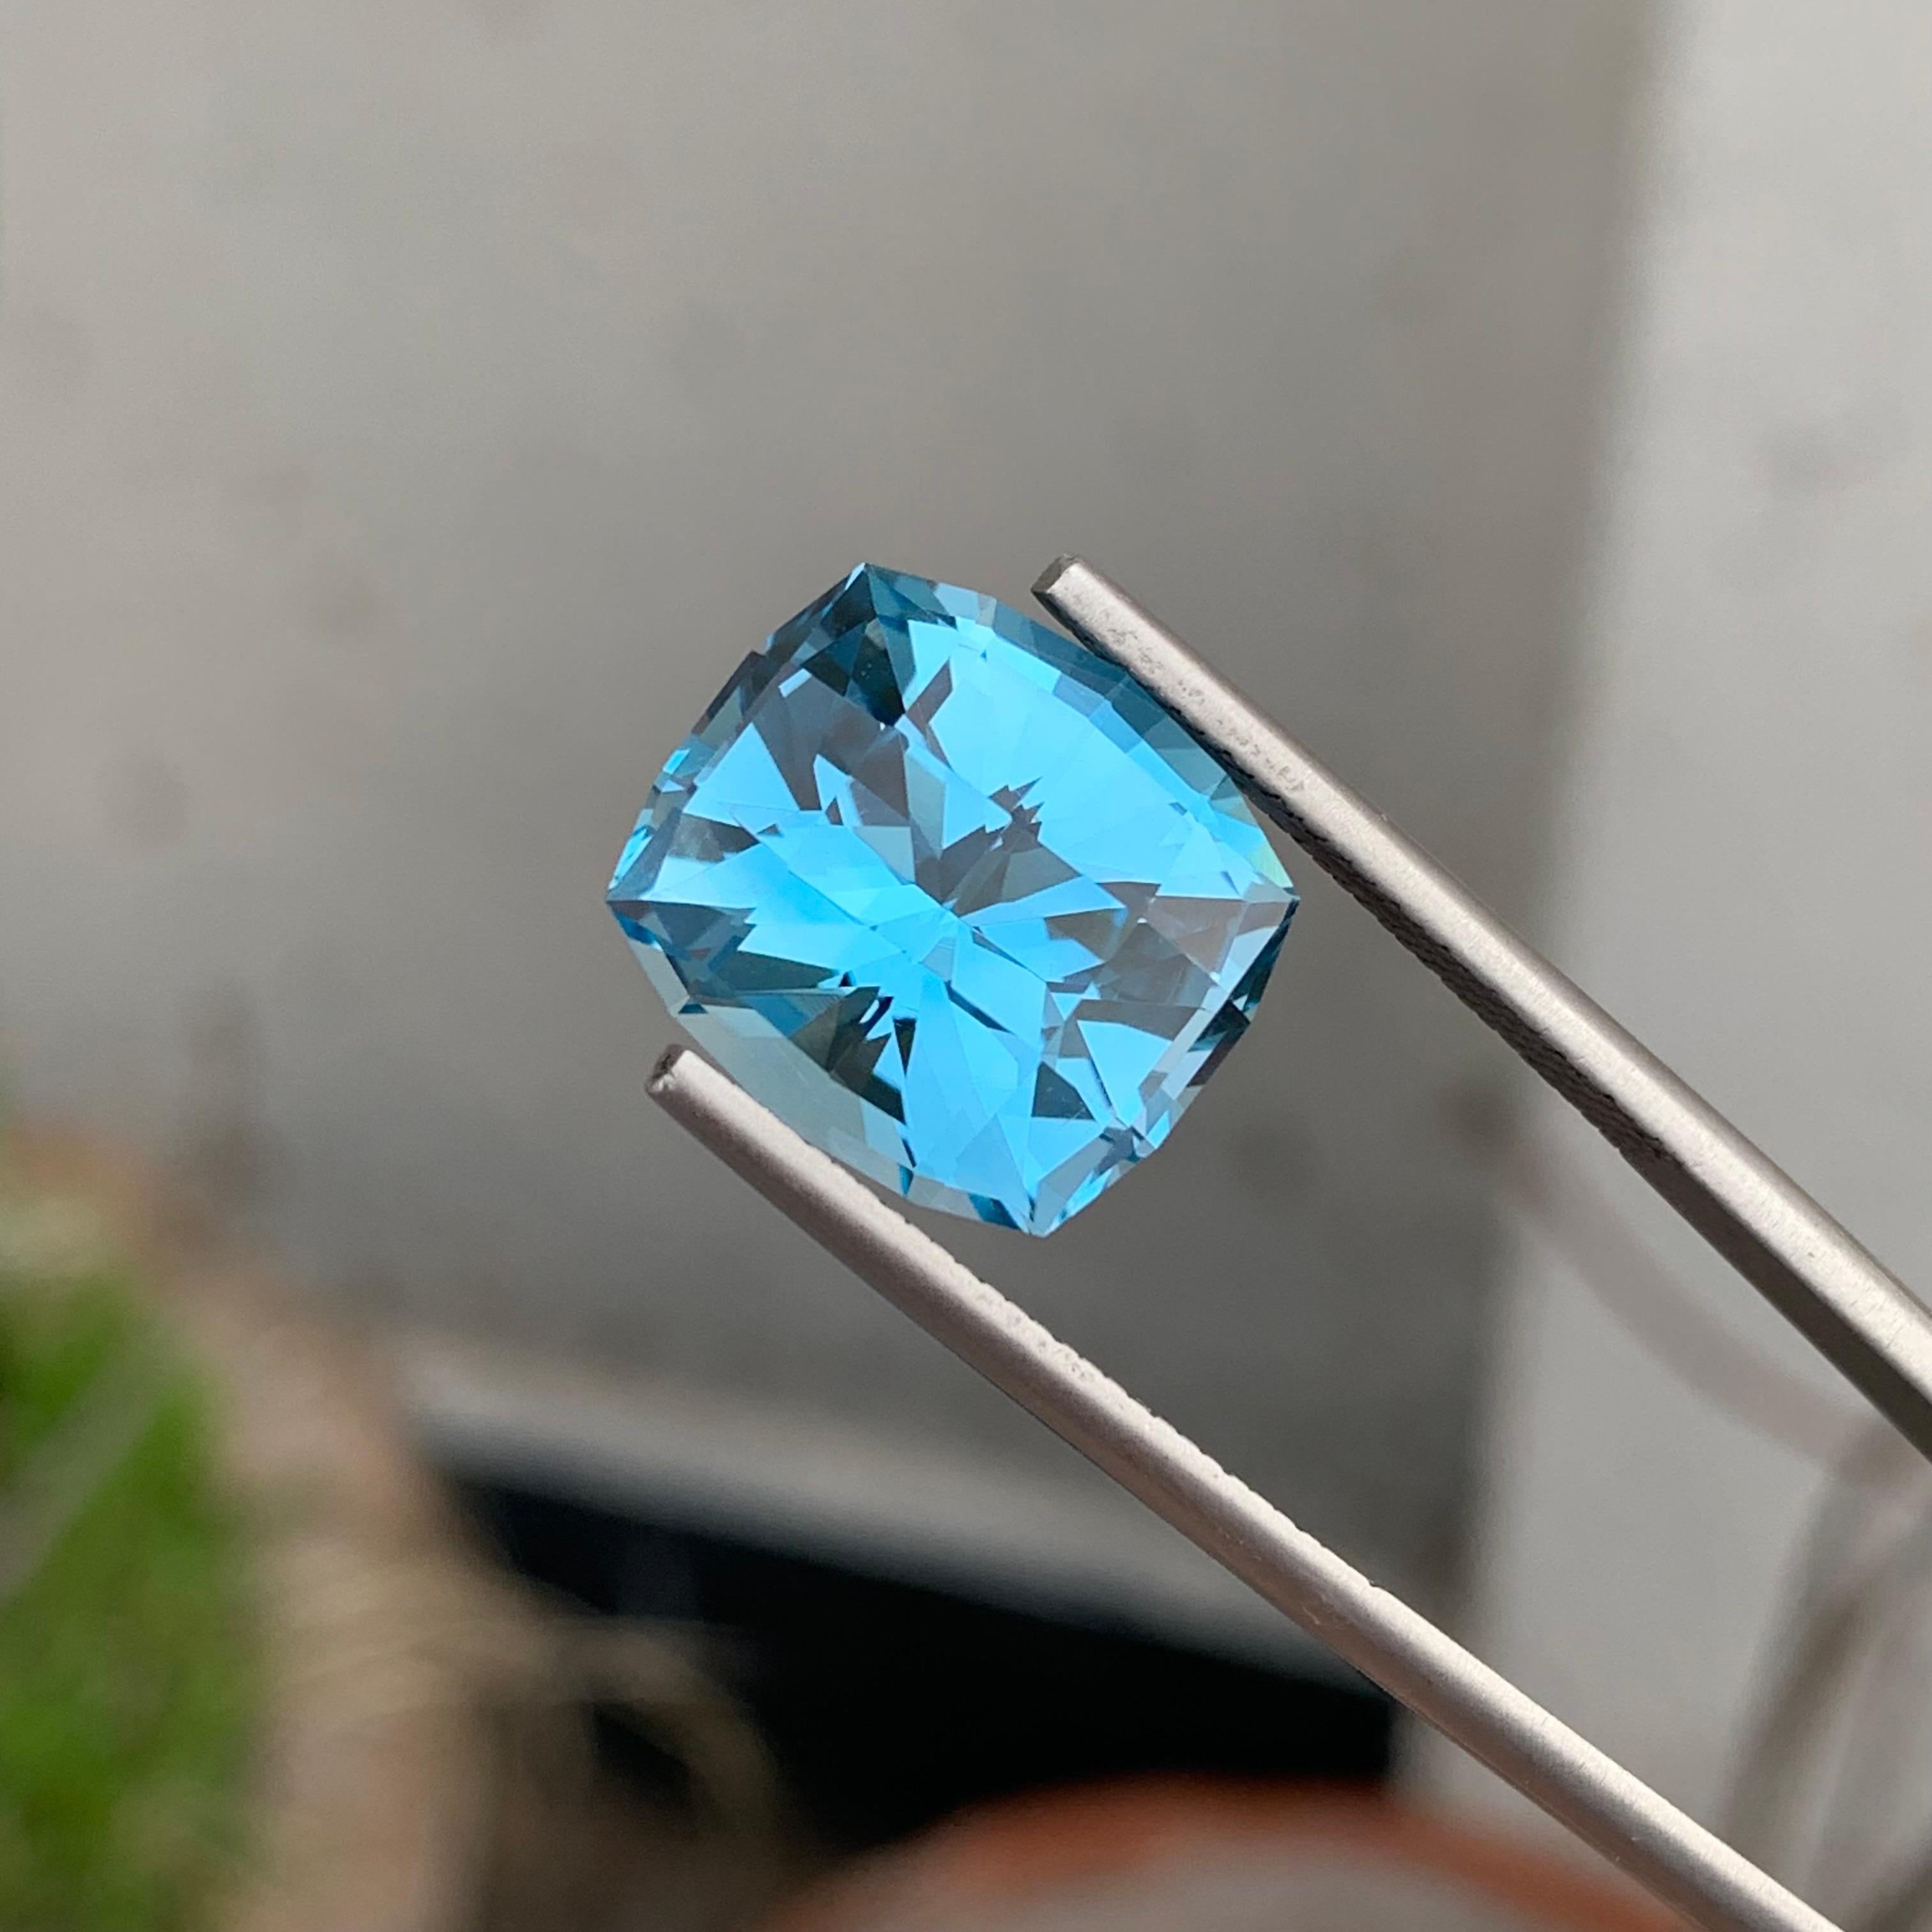 12.15 Carat Fancy Cut Faceted Sky Blue Topaz Gemstone For Jewellery Making  For Sale 1